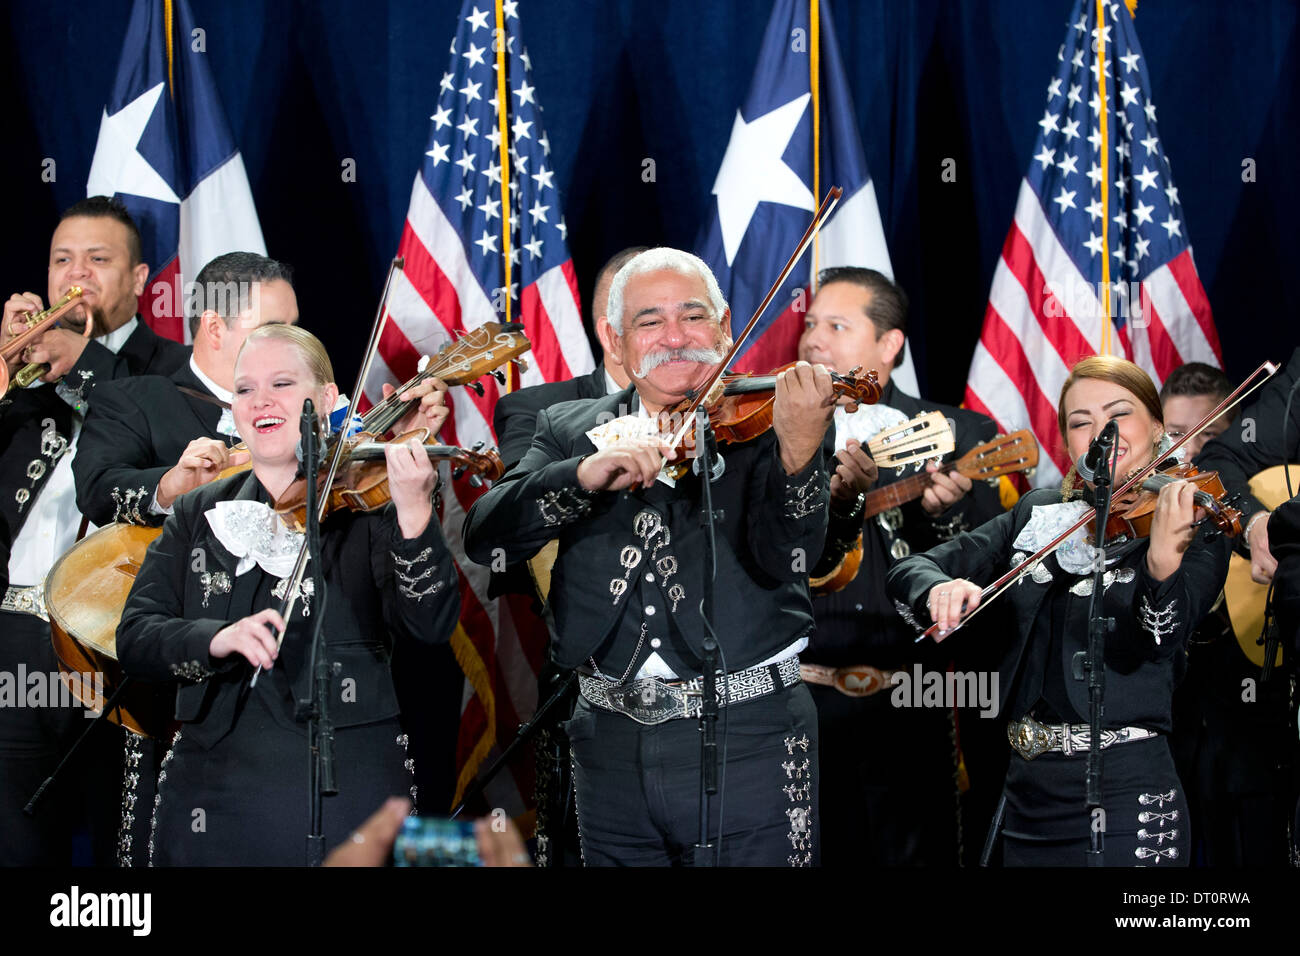 Mariachi band plays on-stage at a political rally in San Antonio, Texas. Stock Photo